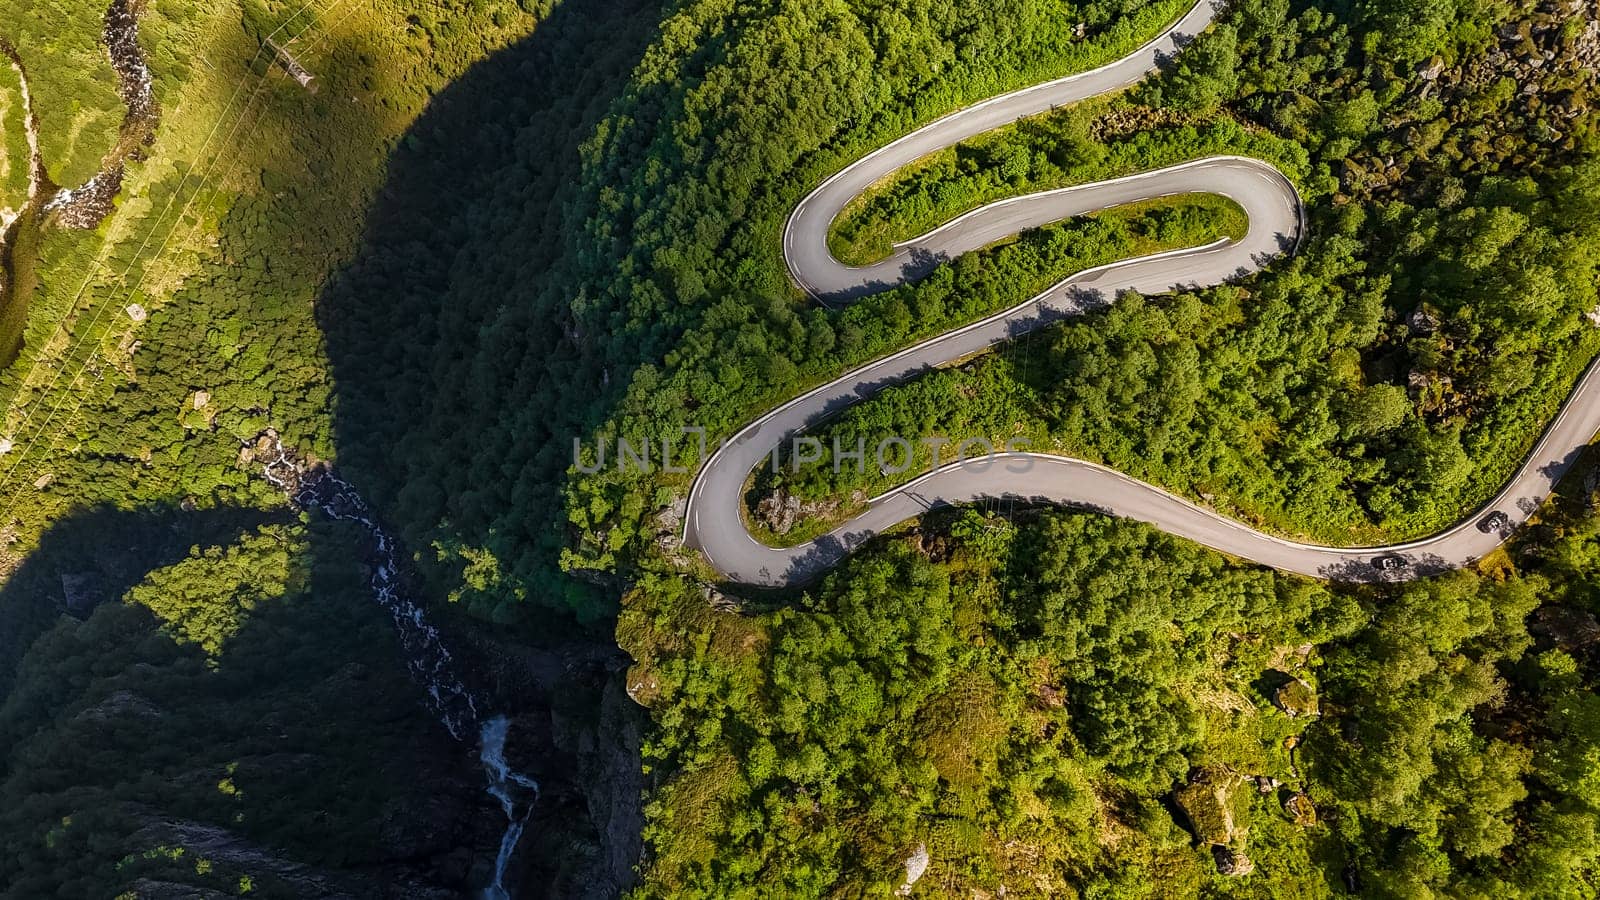 An aerial view of a winding road snaking through a dense forest in Norway. The roads curves and the vibrant green foliage create a stunning visual.